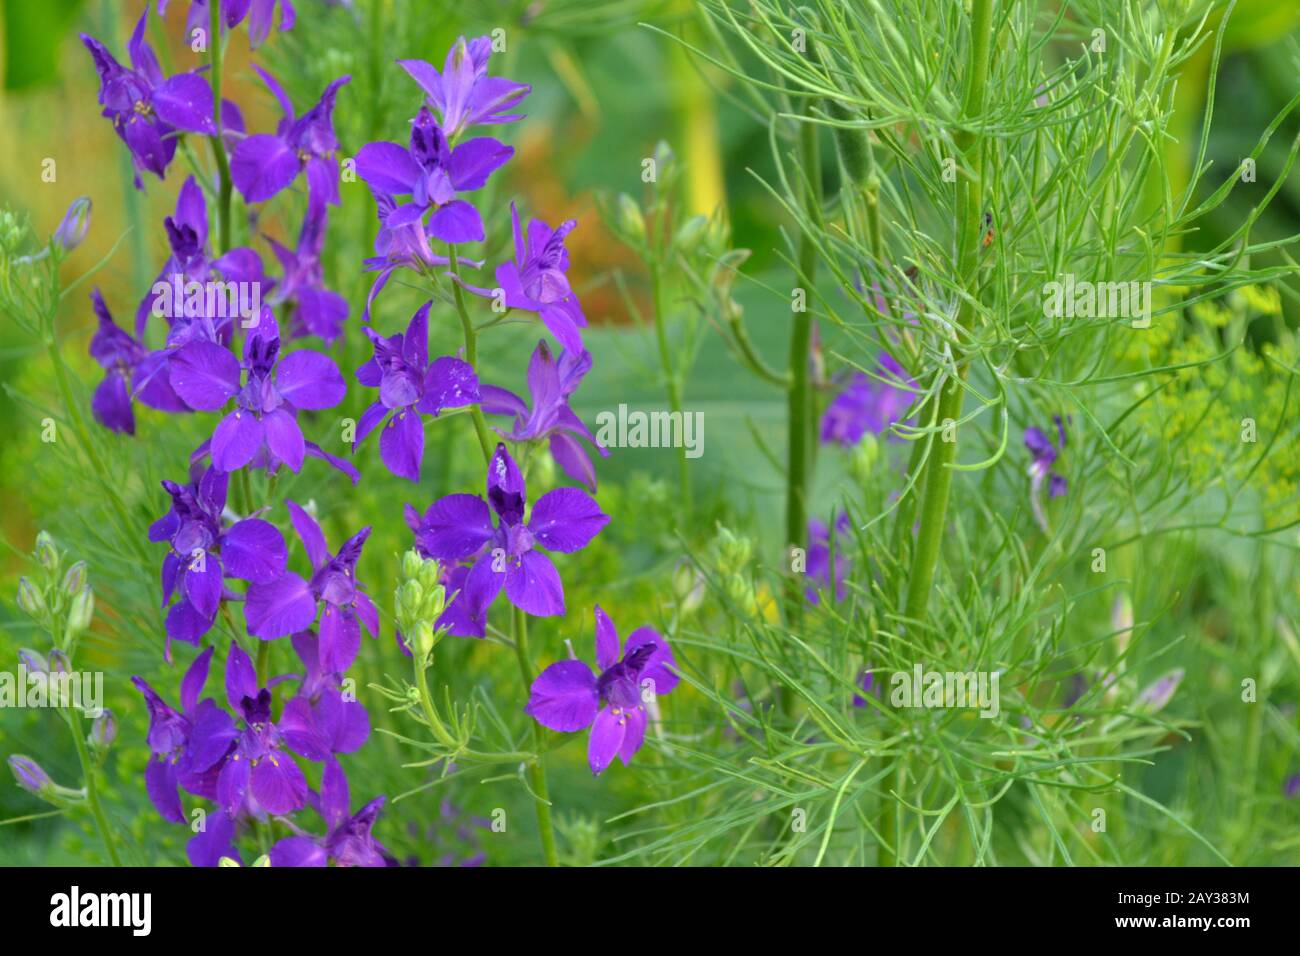 Consolida. Delicate flower. Flower purple. Small flowers on the stem. Among the green leaves. Garden. Field. Growing flowers. On blurred background. H Stock Photo